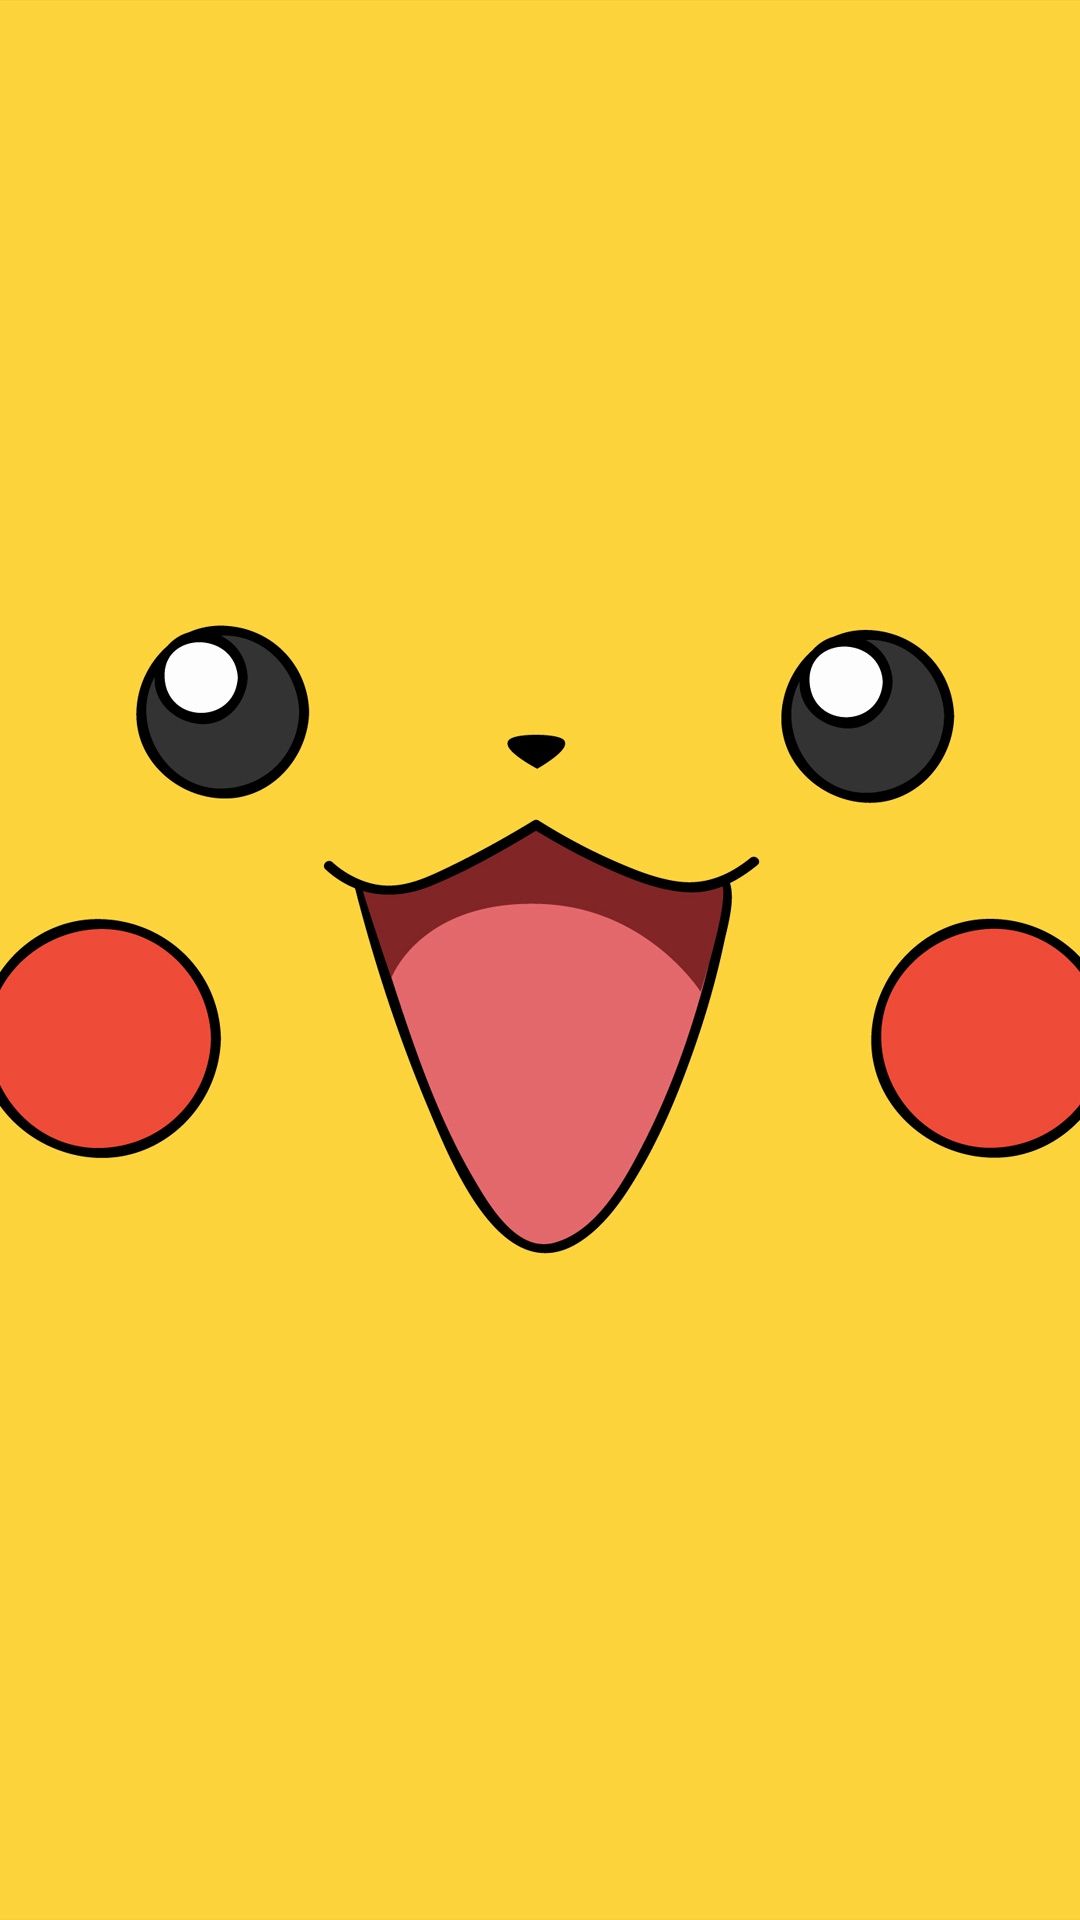 Pikachu iPhone Wallpaper Best Of Pikachu HD Wallpaper for iPhone 7 Of the Day of The Hudson